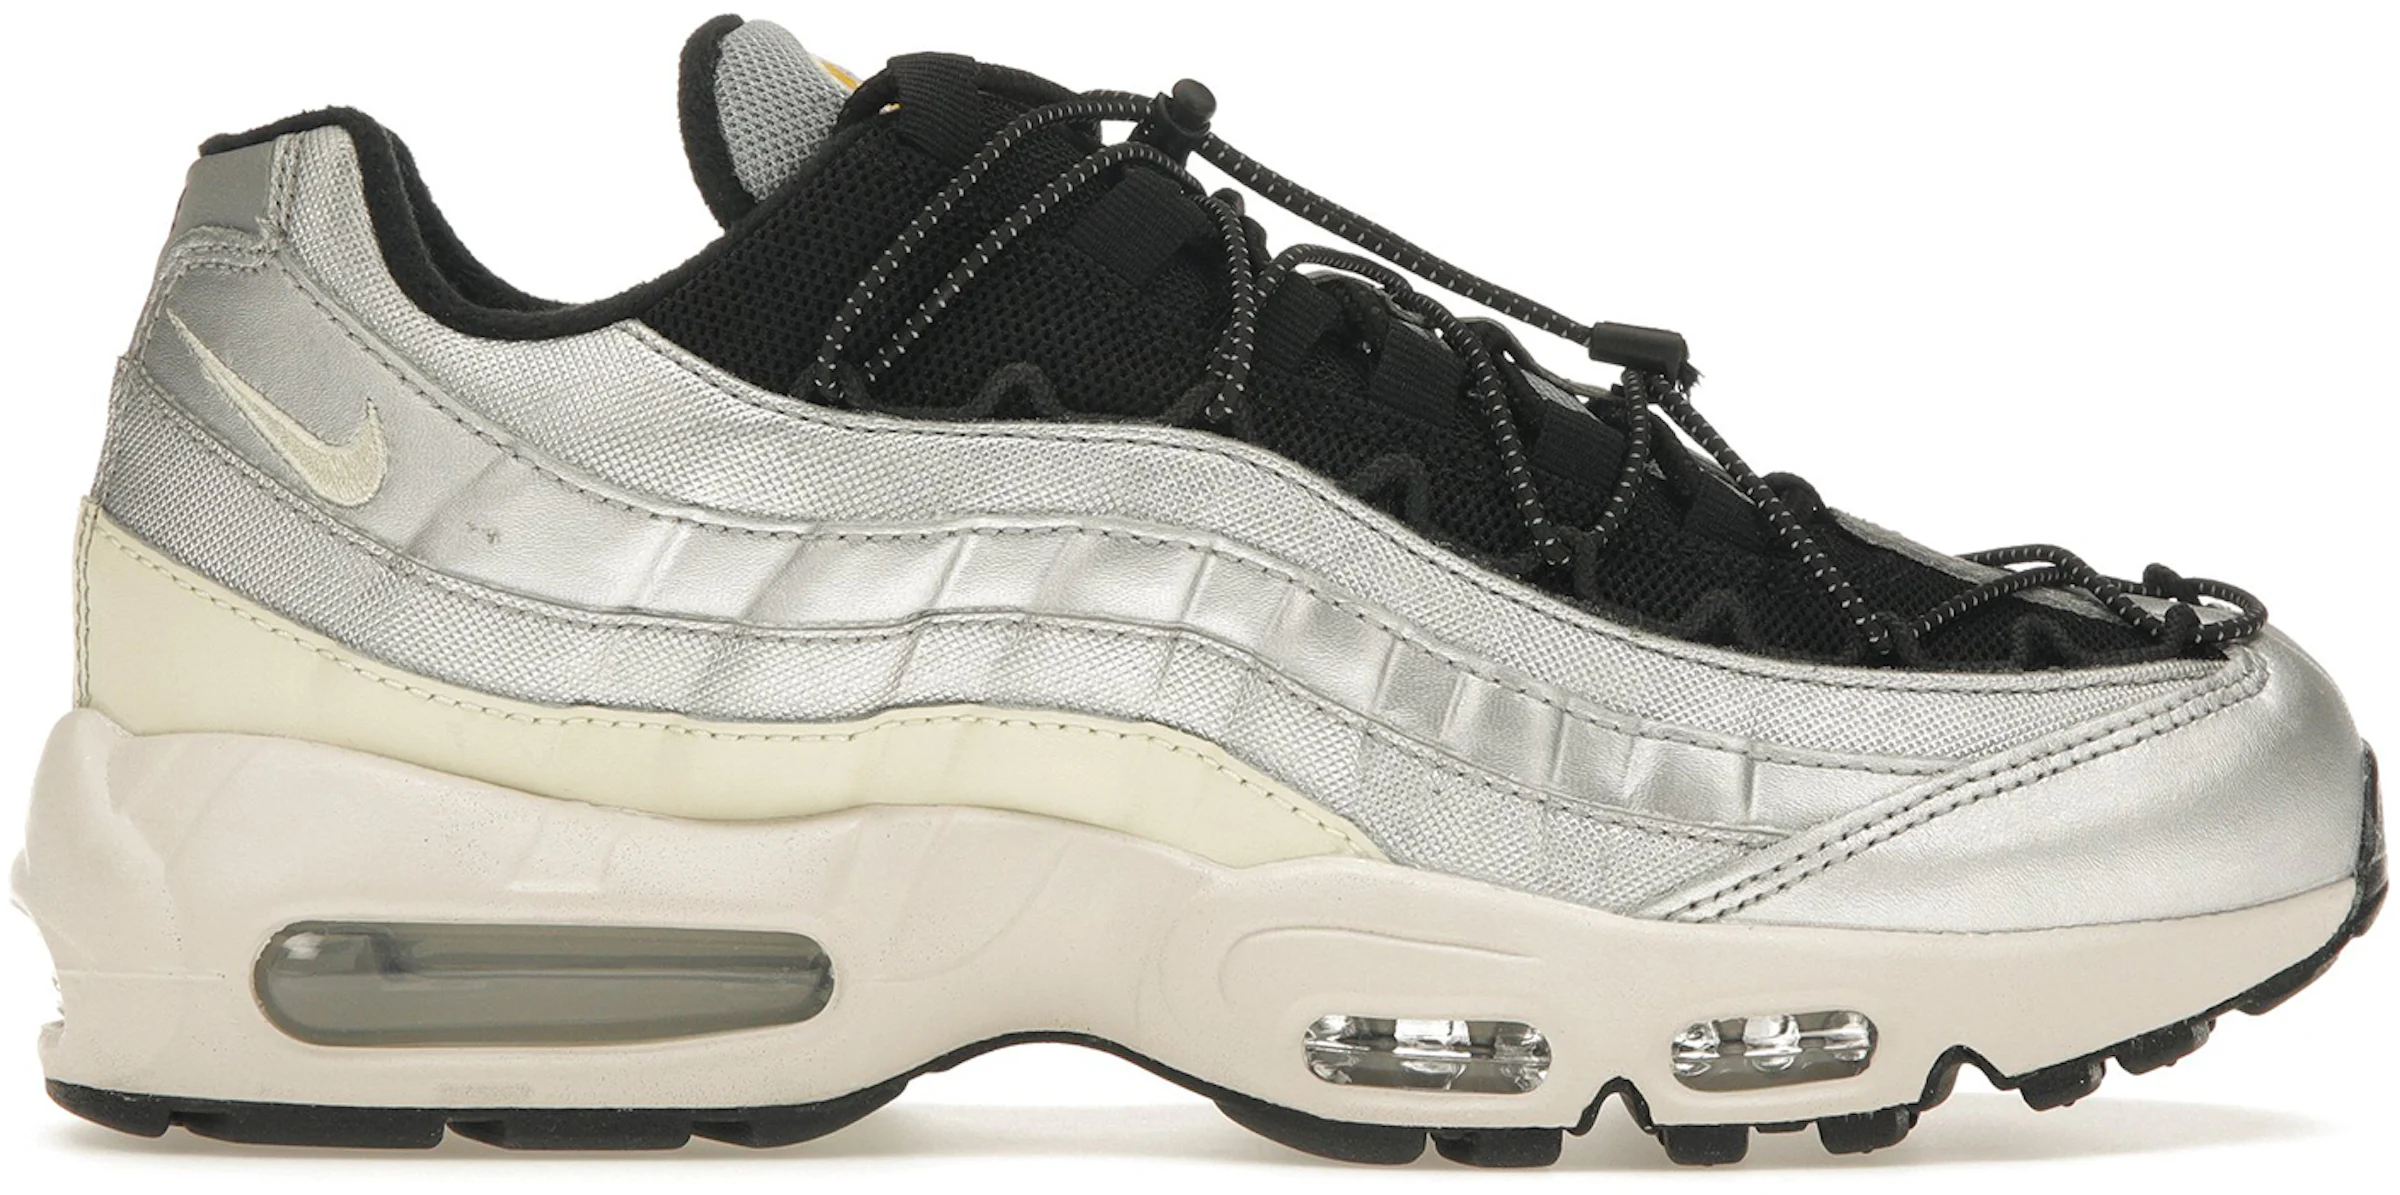 Buy Nike Air Max 95 Shoes & New Sneakers - StockX